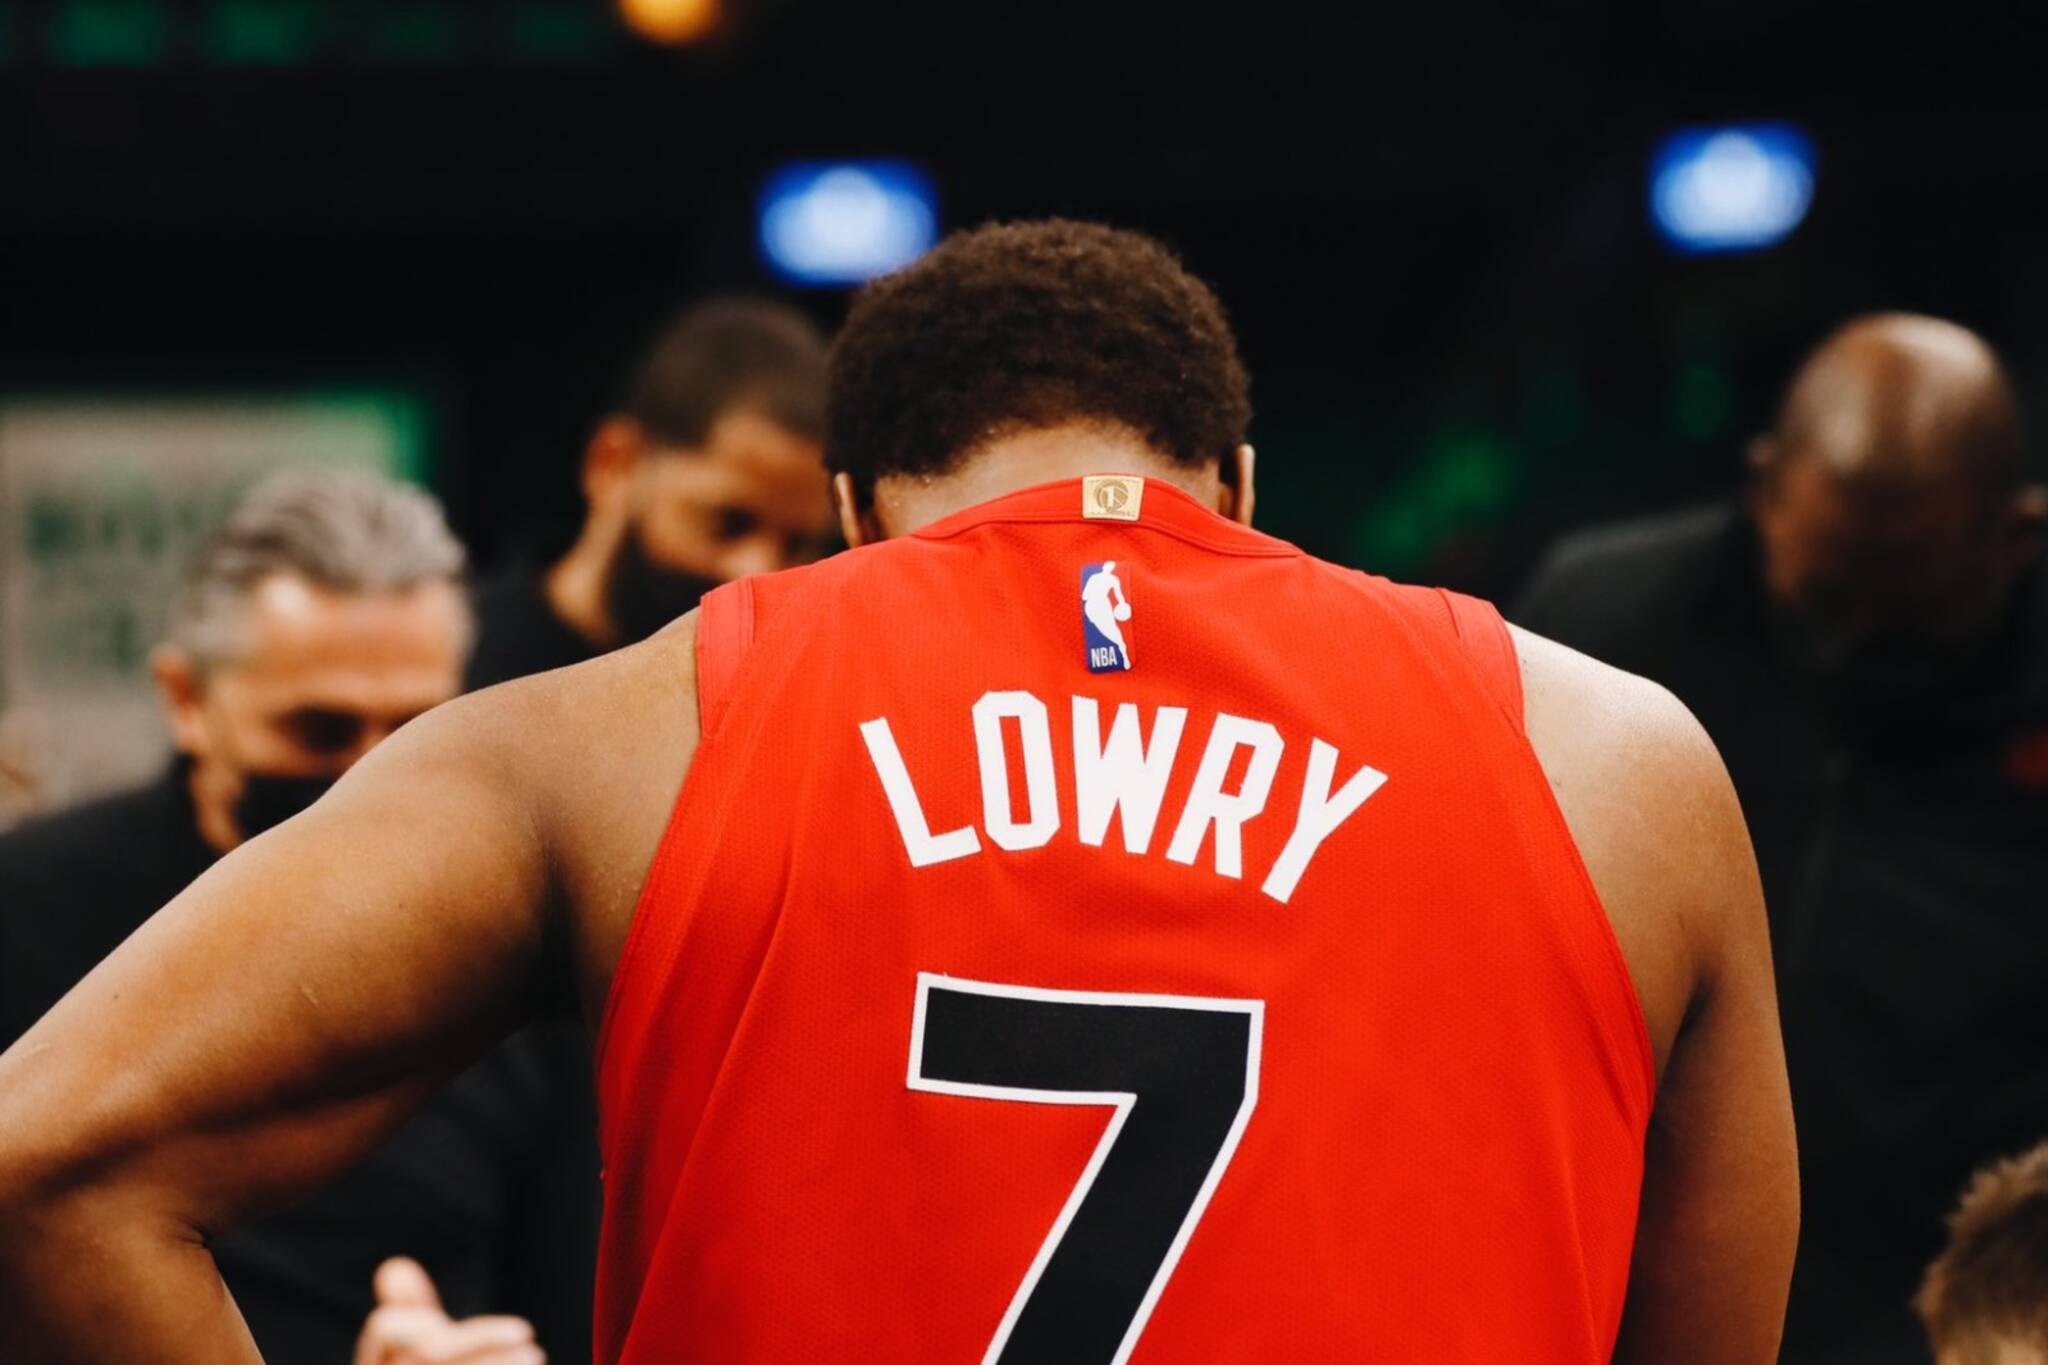 Kyle Lowry to miss Toronto homecoming game against Raptors